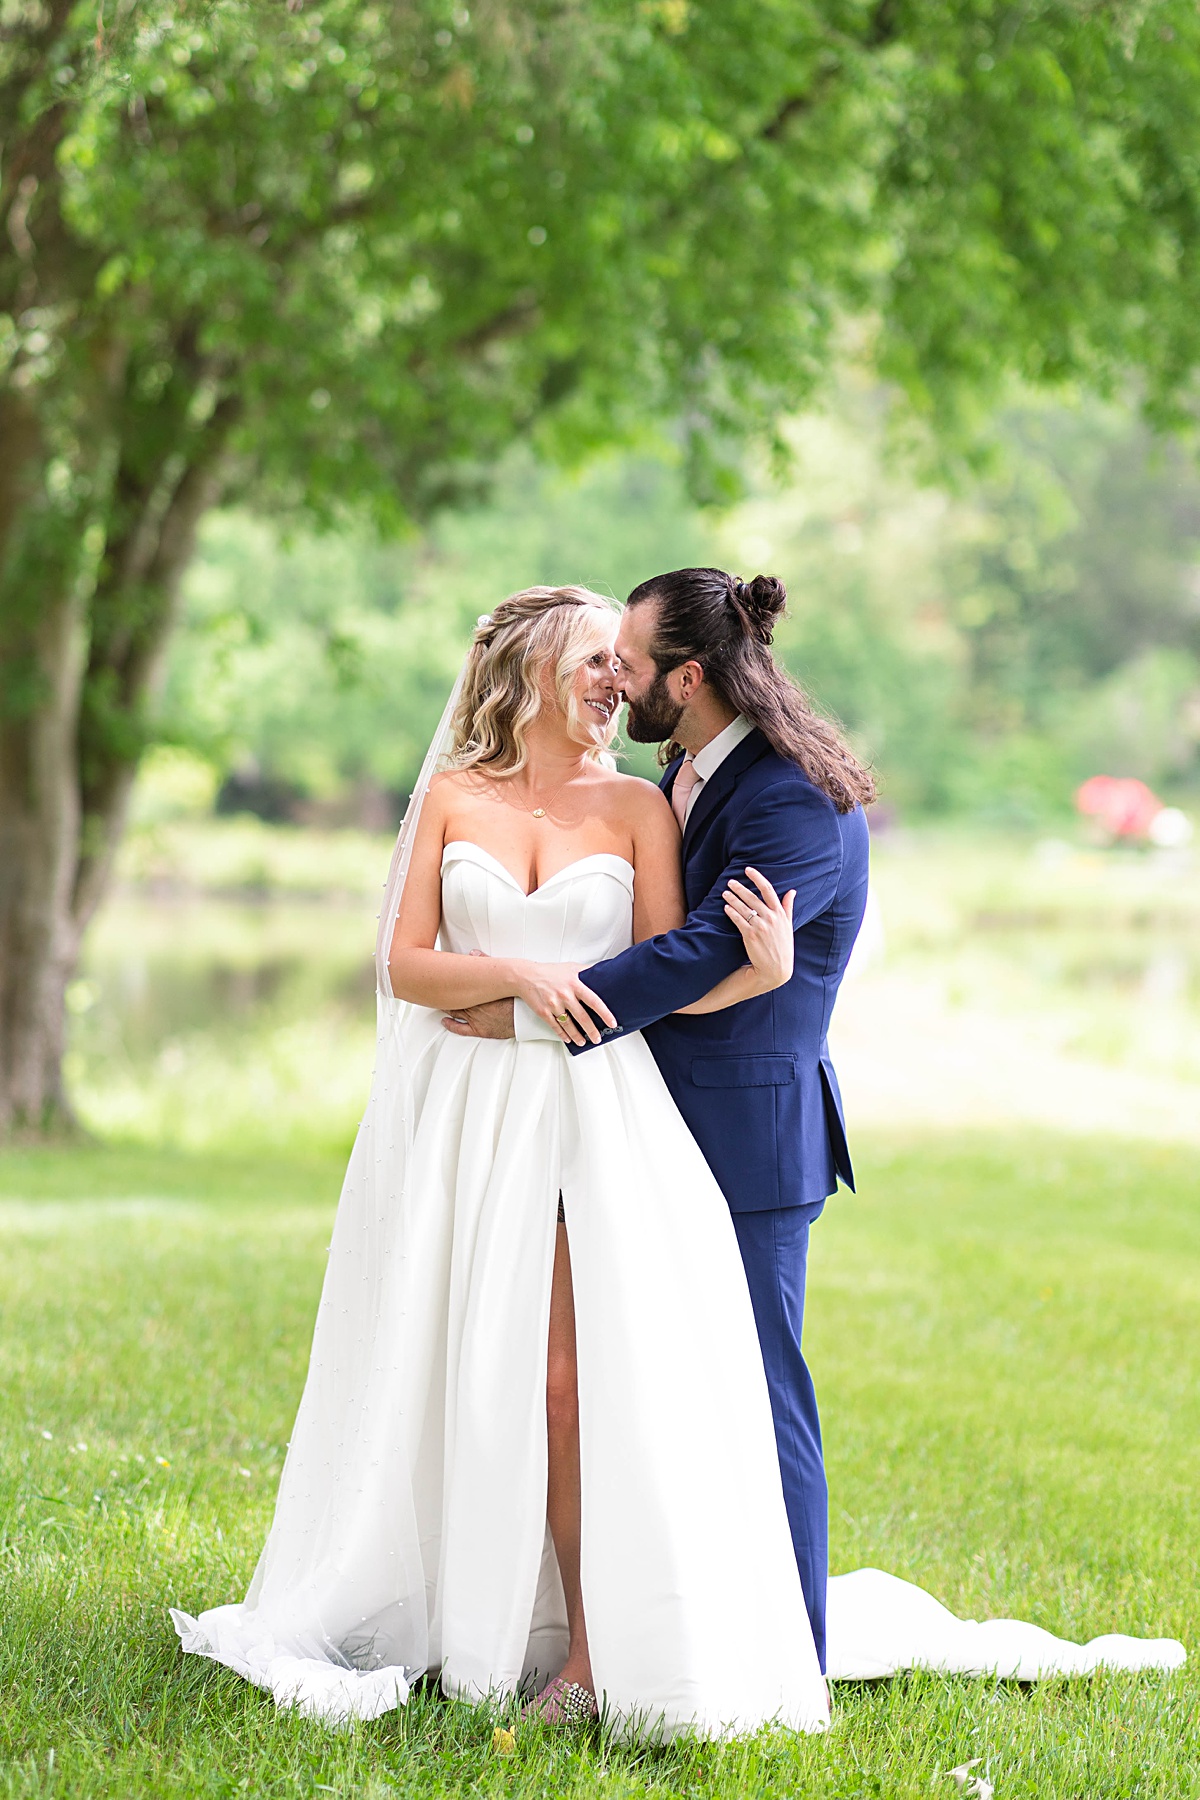 This rustic spring garden wedding at Running Mare Farm in Richmond, Virginia features some tear jerking first looks, a heavy thunderstorm, and a wedding dress that fits this bride's sassy personality!!